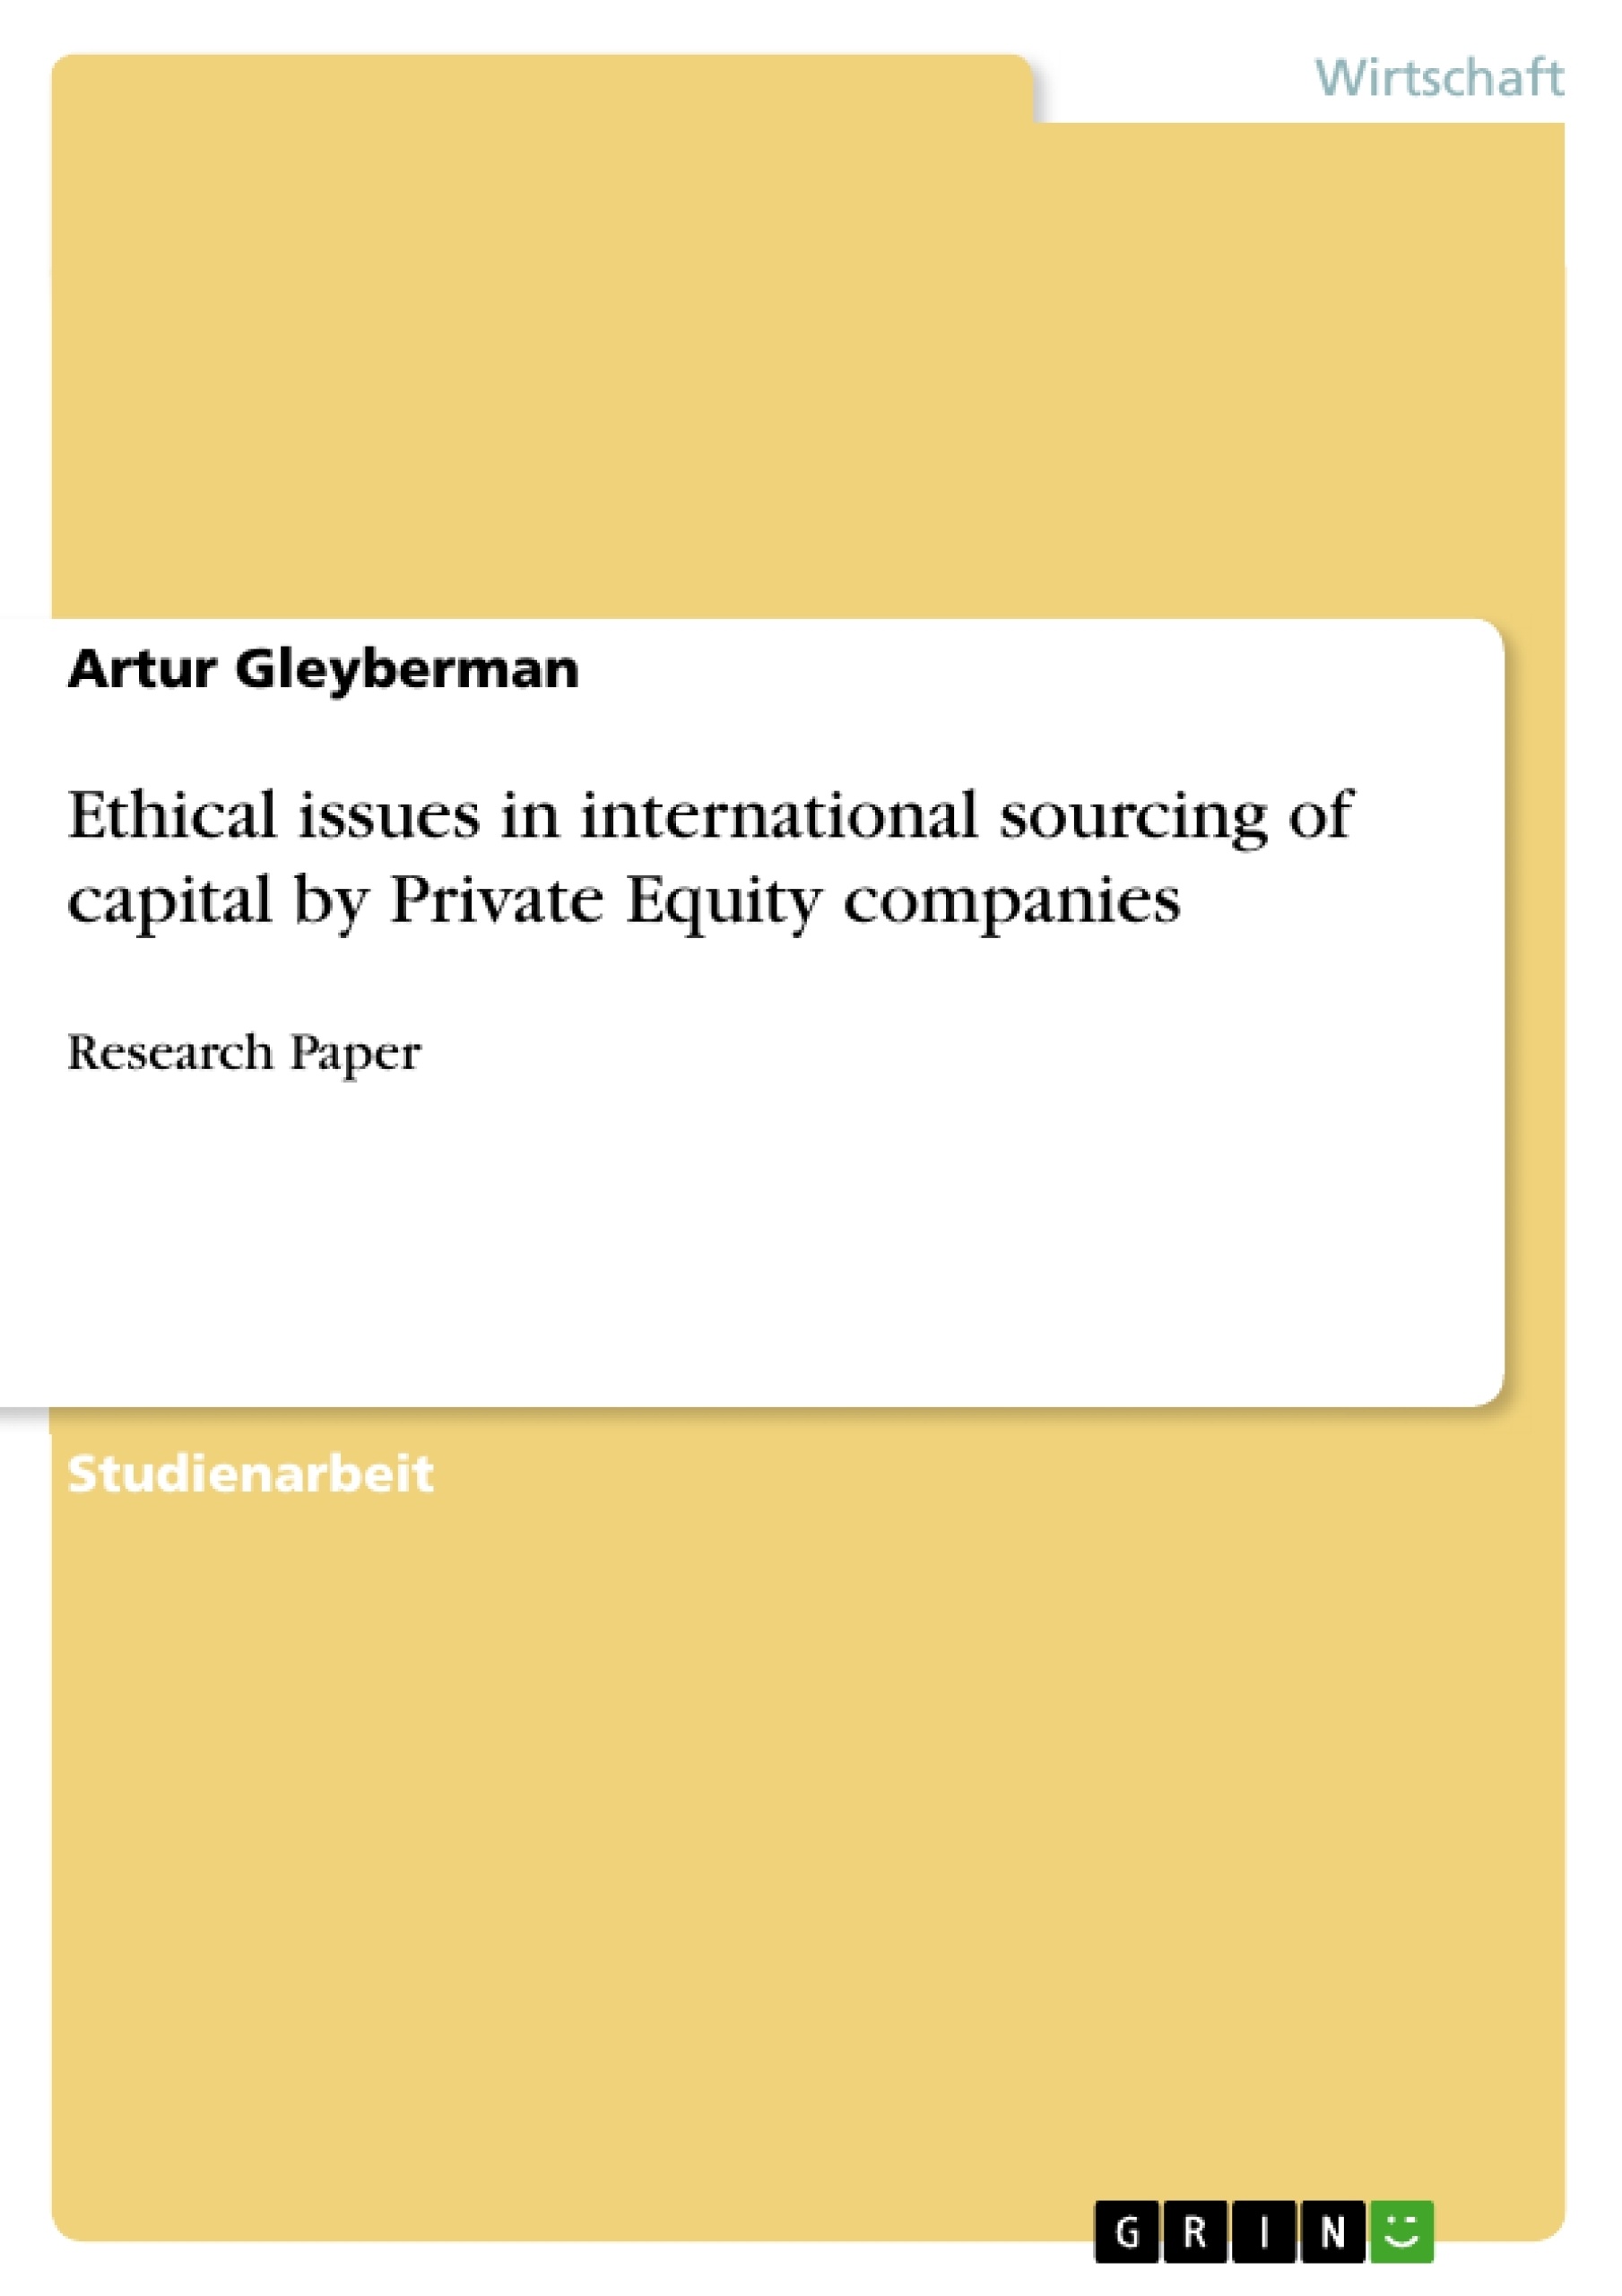 Titre: Ethical issues in international sourcing of capital by Private Equity companies